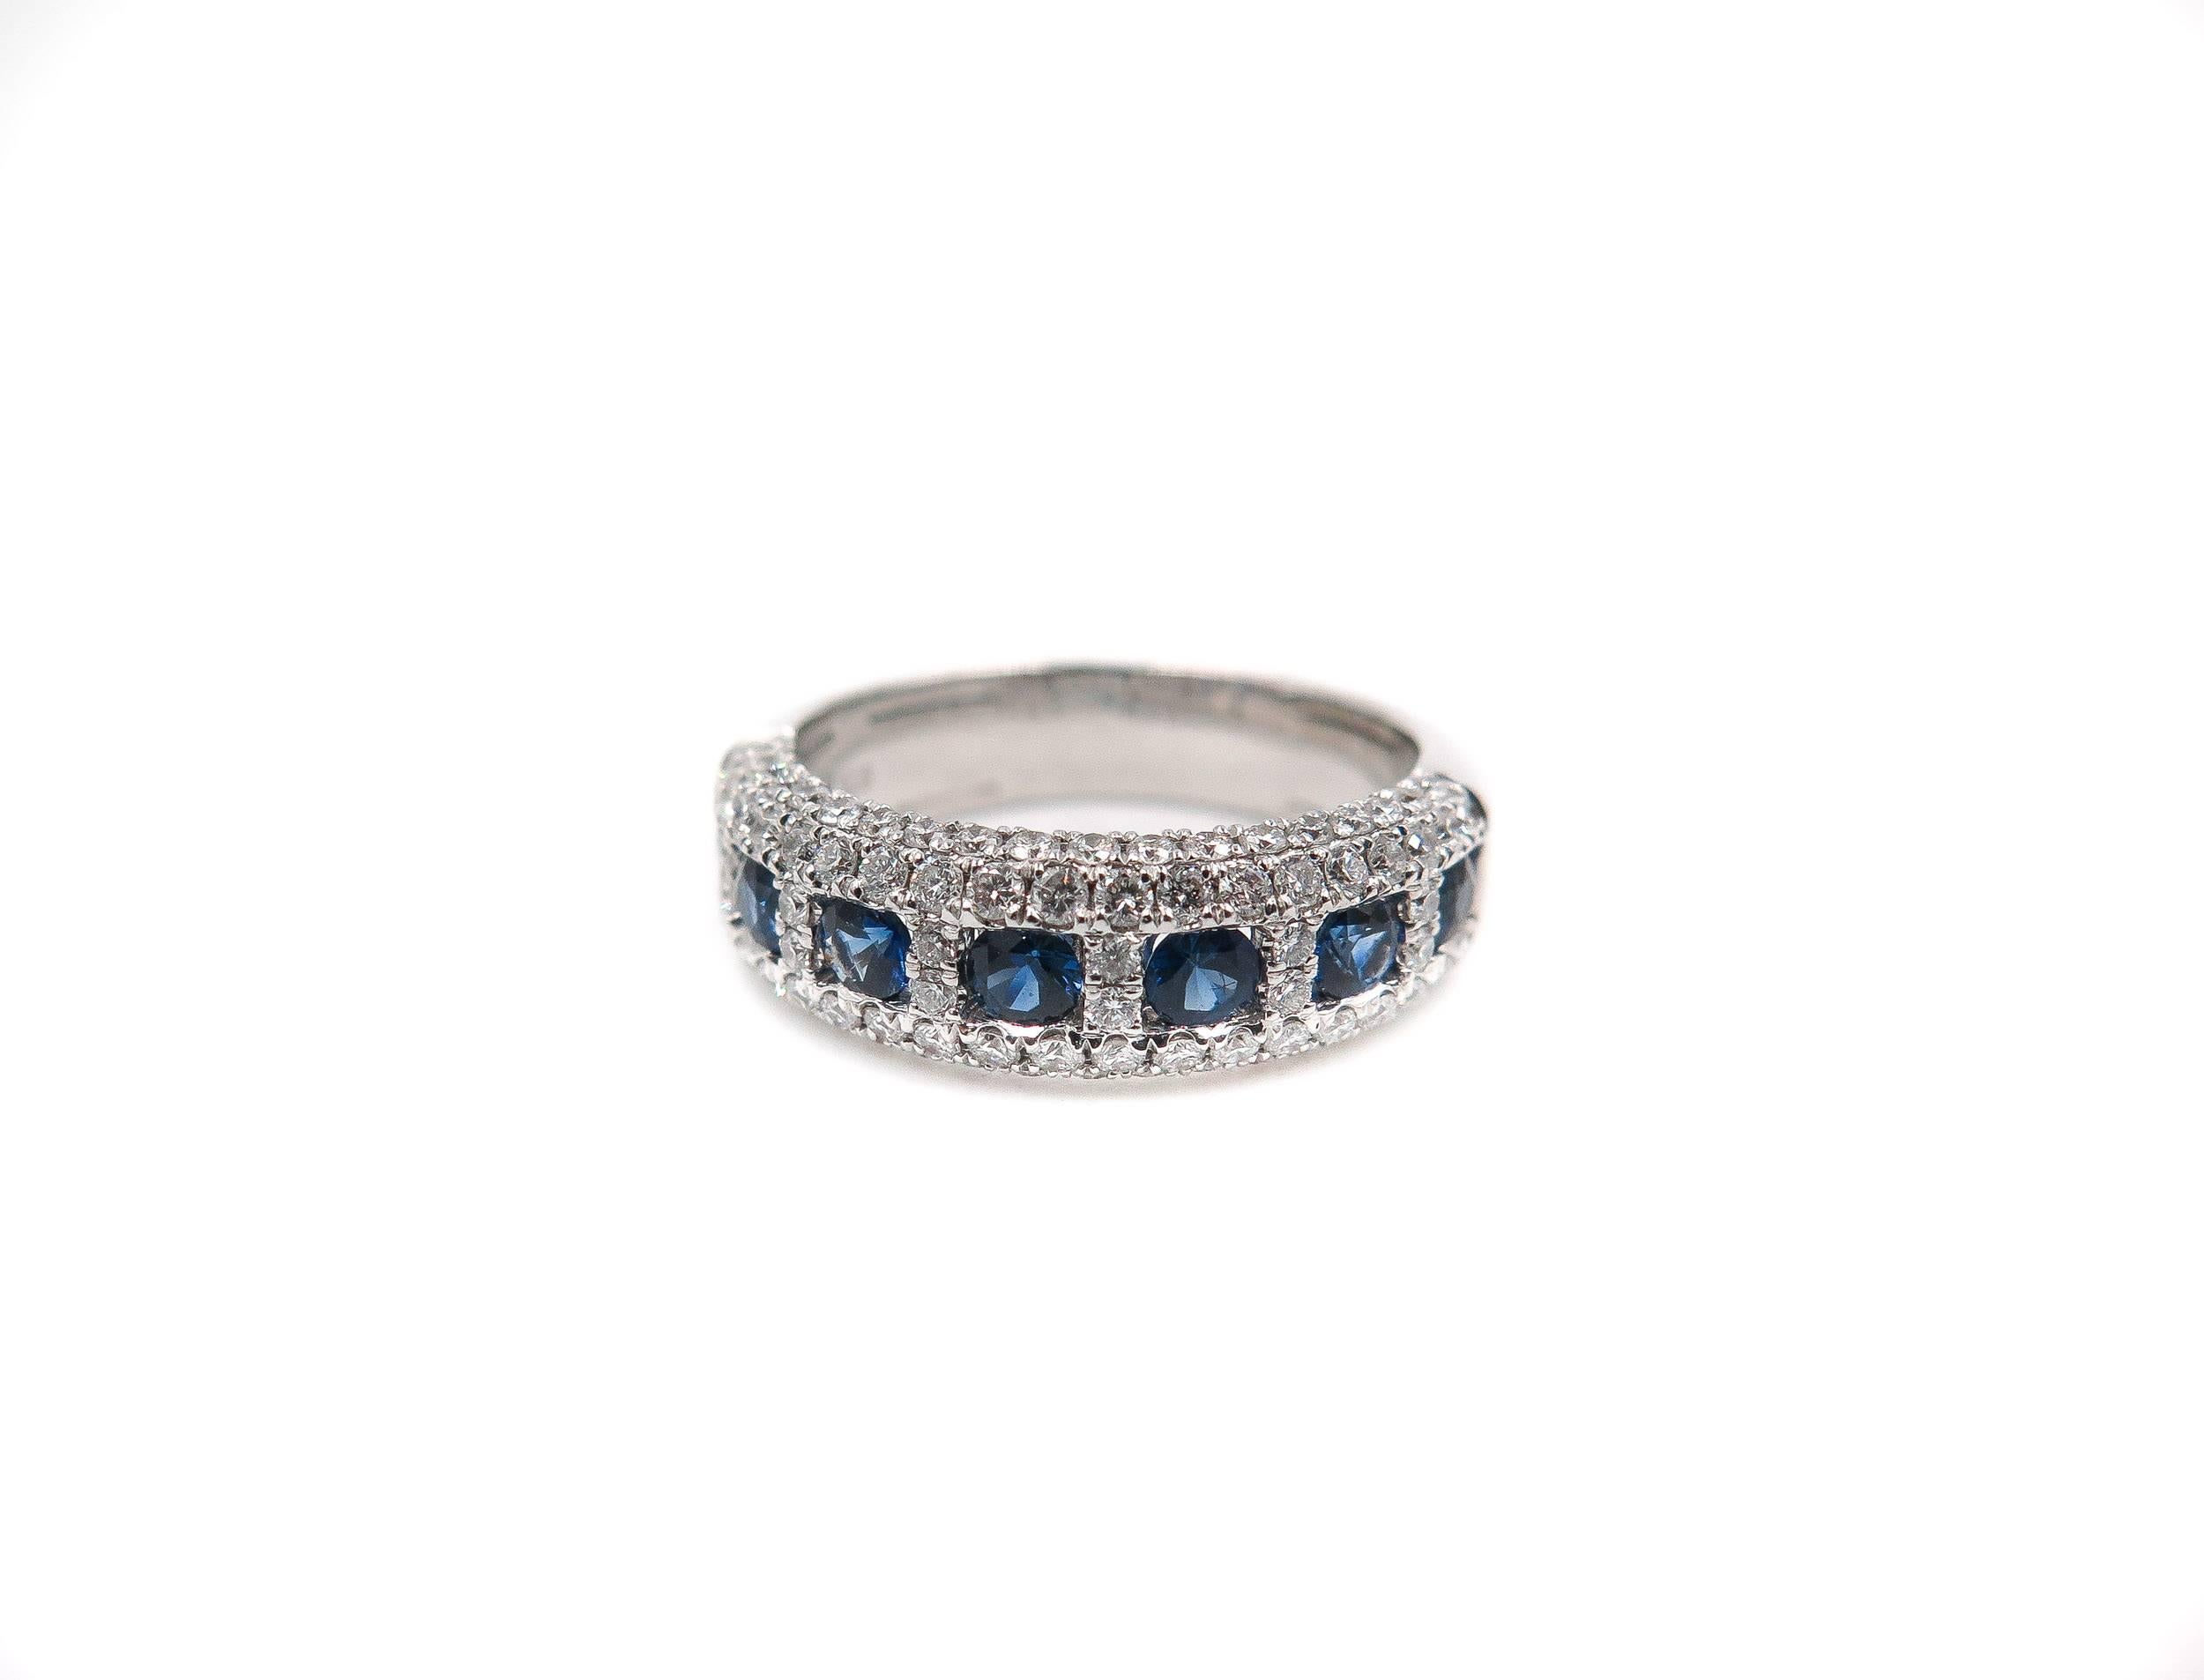 The gorgeous blue color is mesmerizing in this sapphire and diamond band. 
This classic design brings you 7 princess cut blue sapphires weighing approximately 0.75 carats and accentuated by 0.75 carats of white round diamonds. 
Handcrafted in 18K